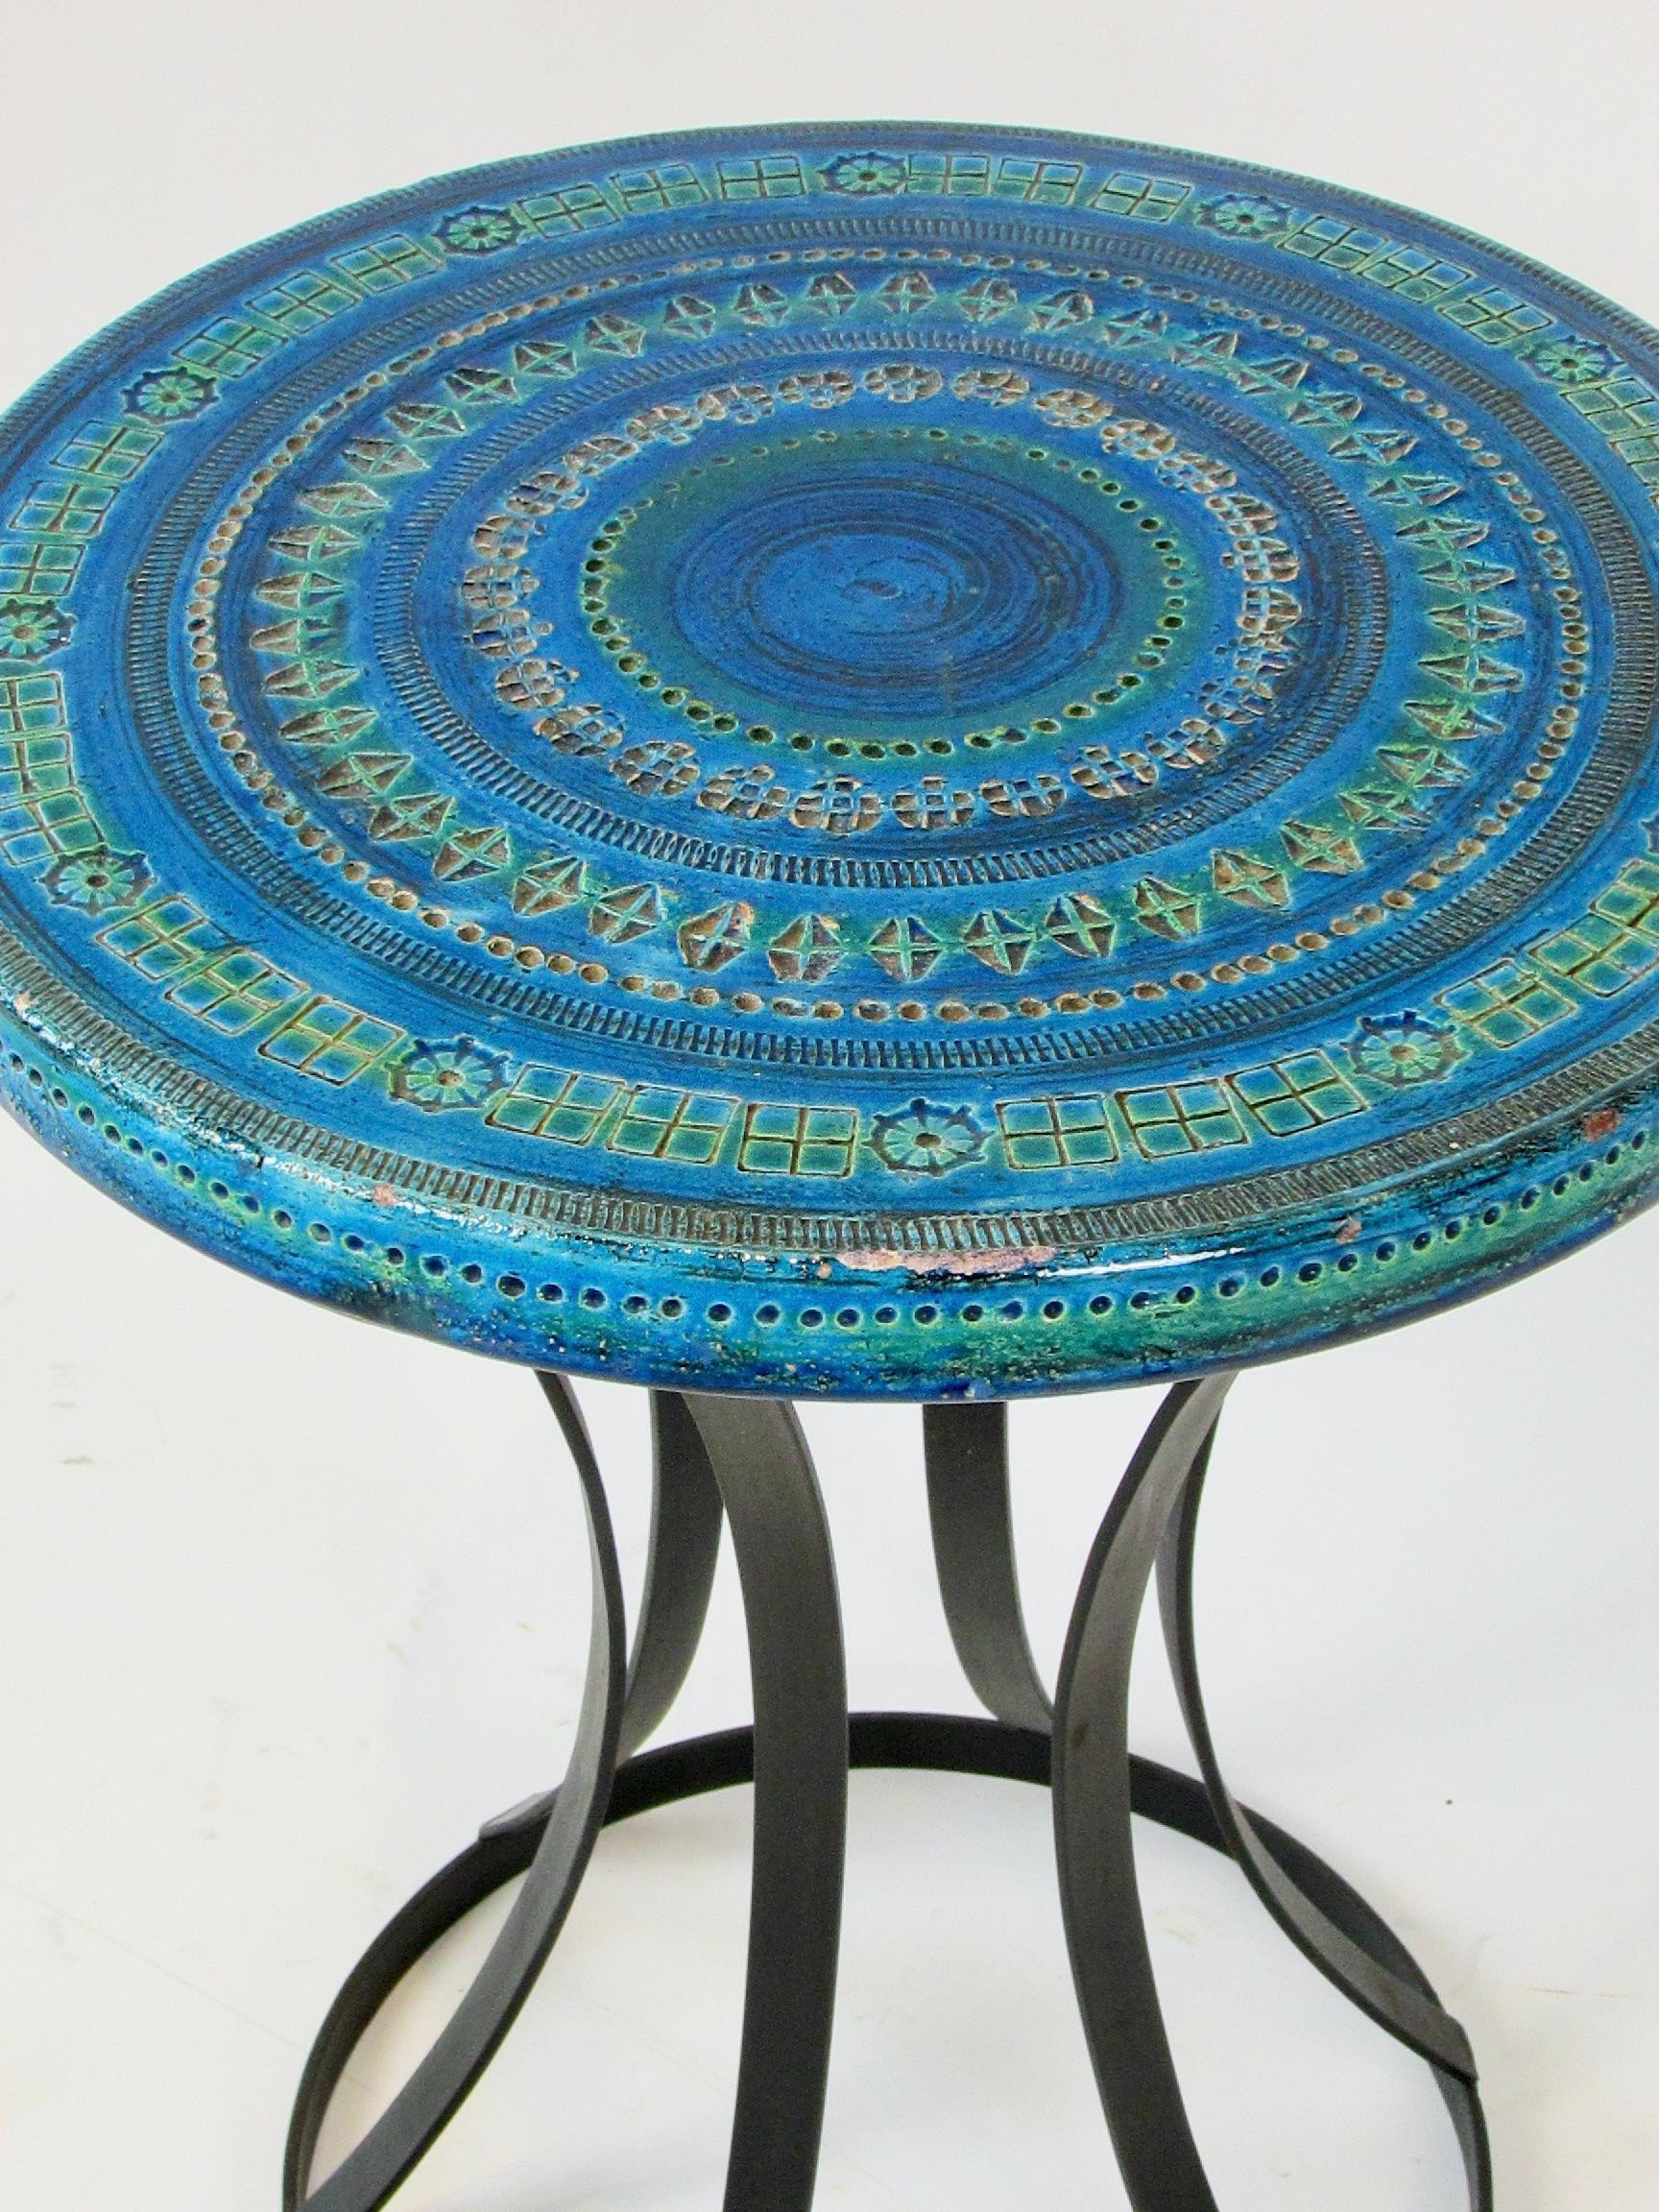 Fired Blue Green Aldo Londi Bitossi for Raymor Pottery Table Top on Wrought Base For Sale